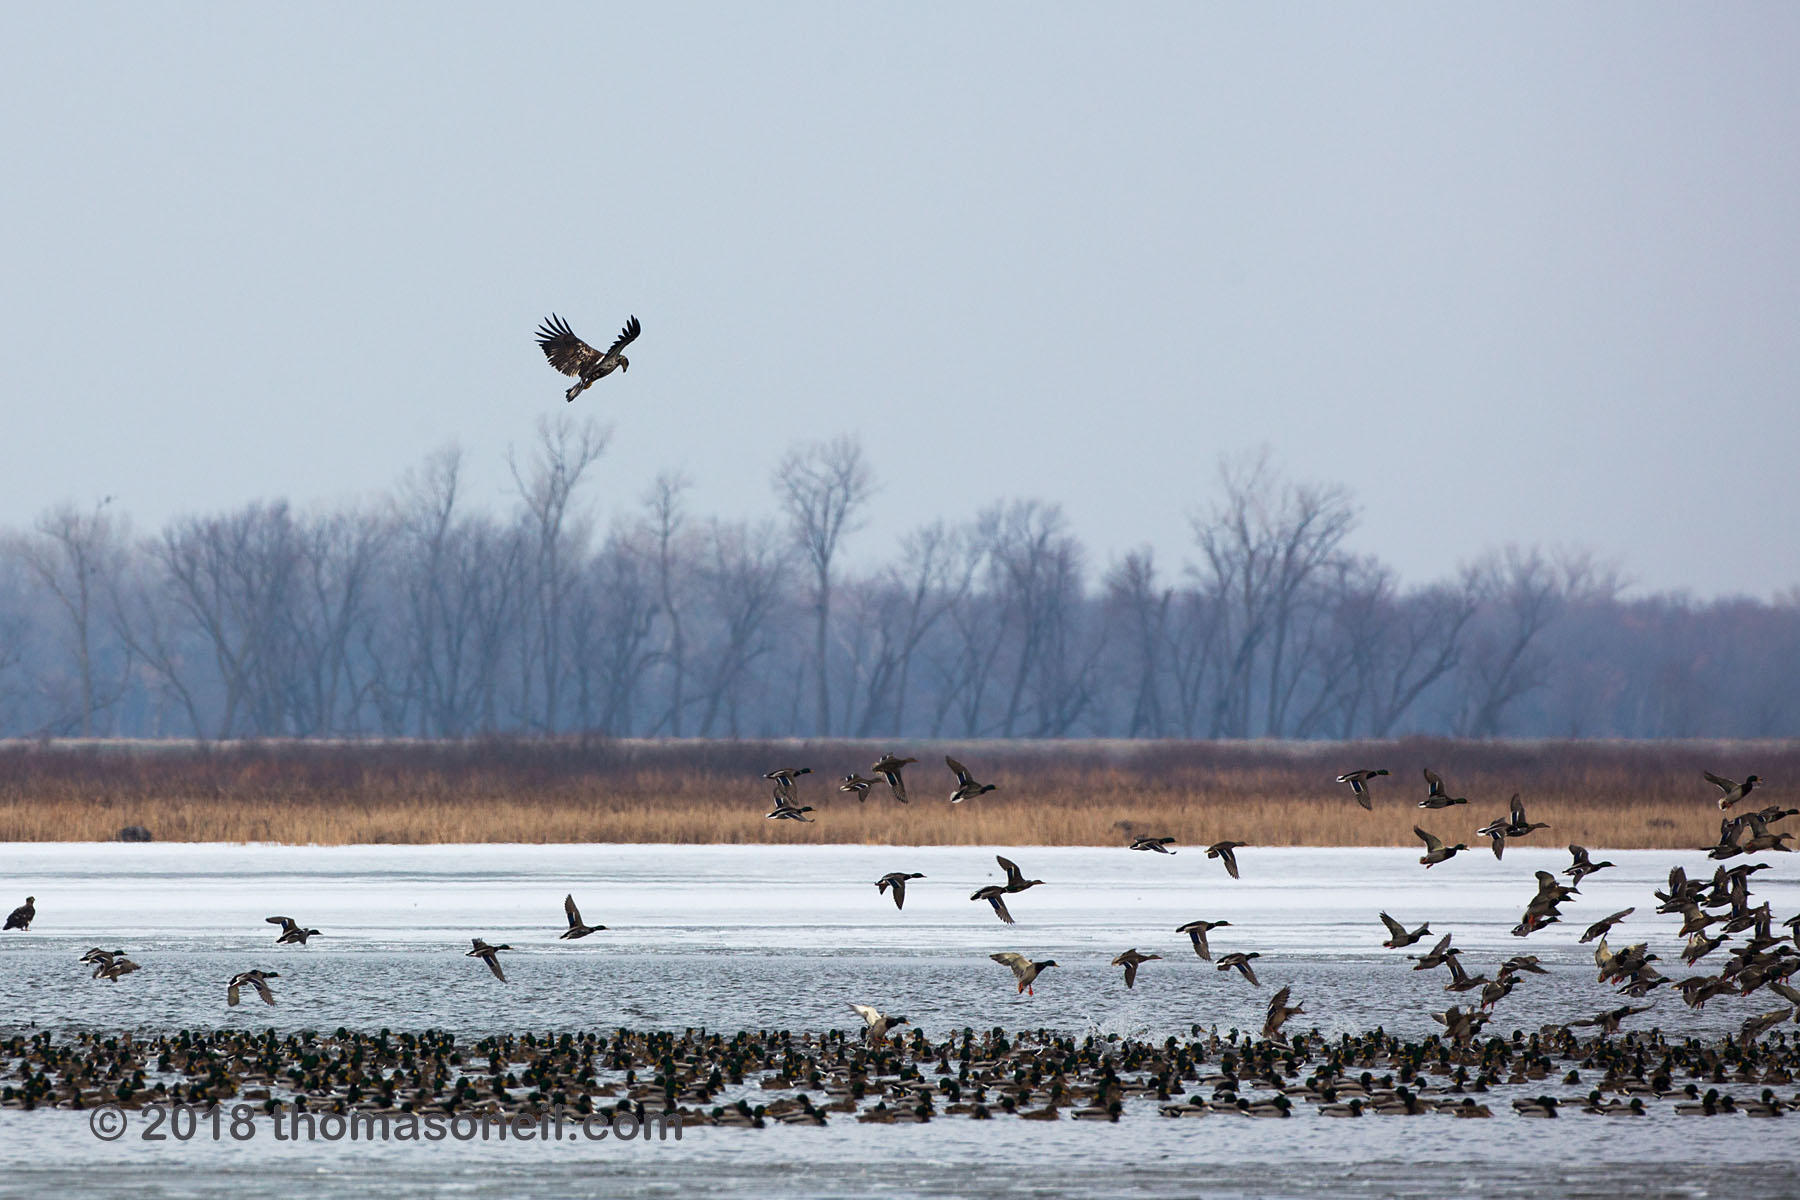 Bald eagle trying to stir up the ducks, Loess Bluffs National Wildlife Refuge, Missouri.  Click for next photo.